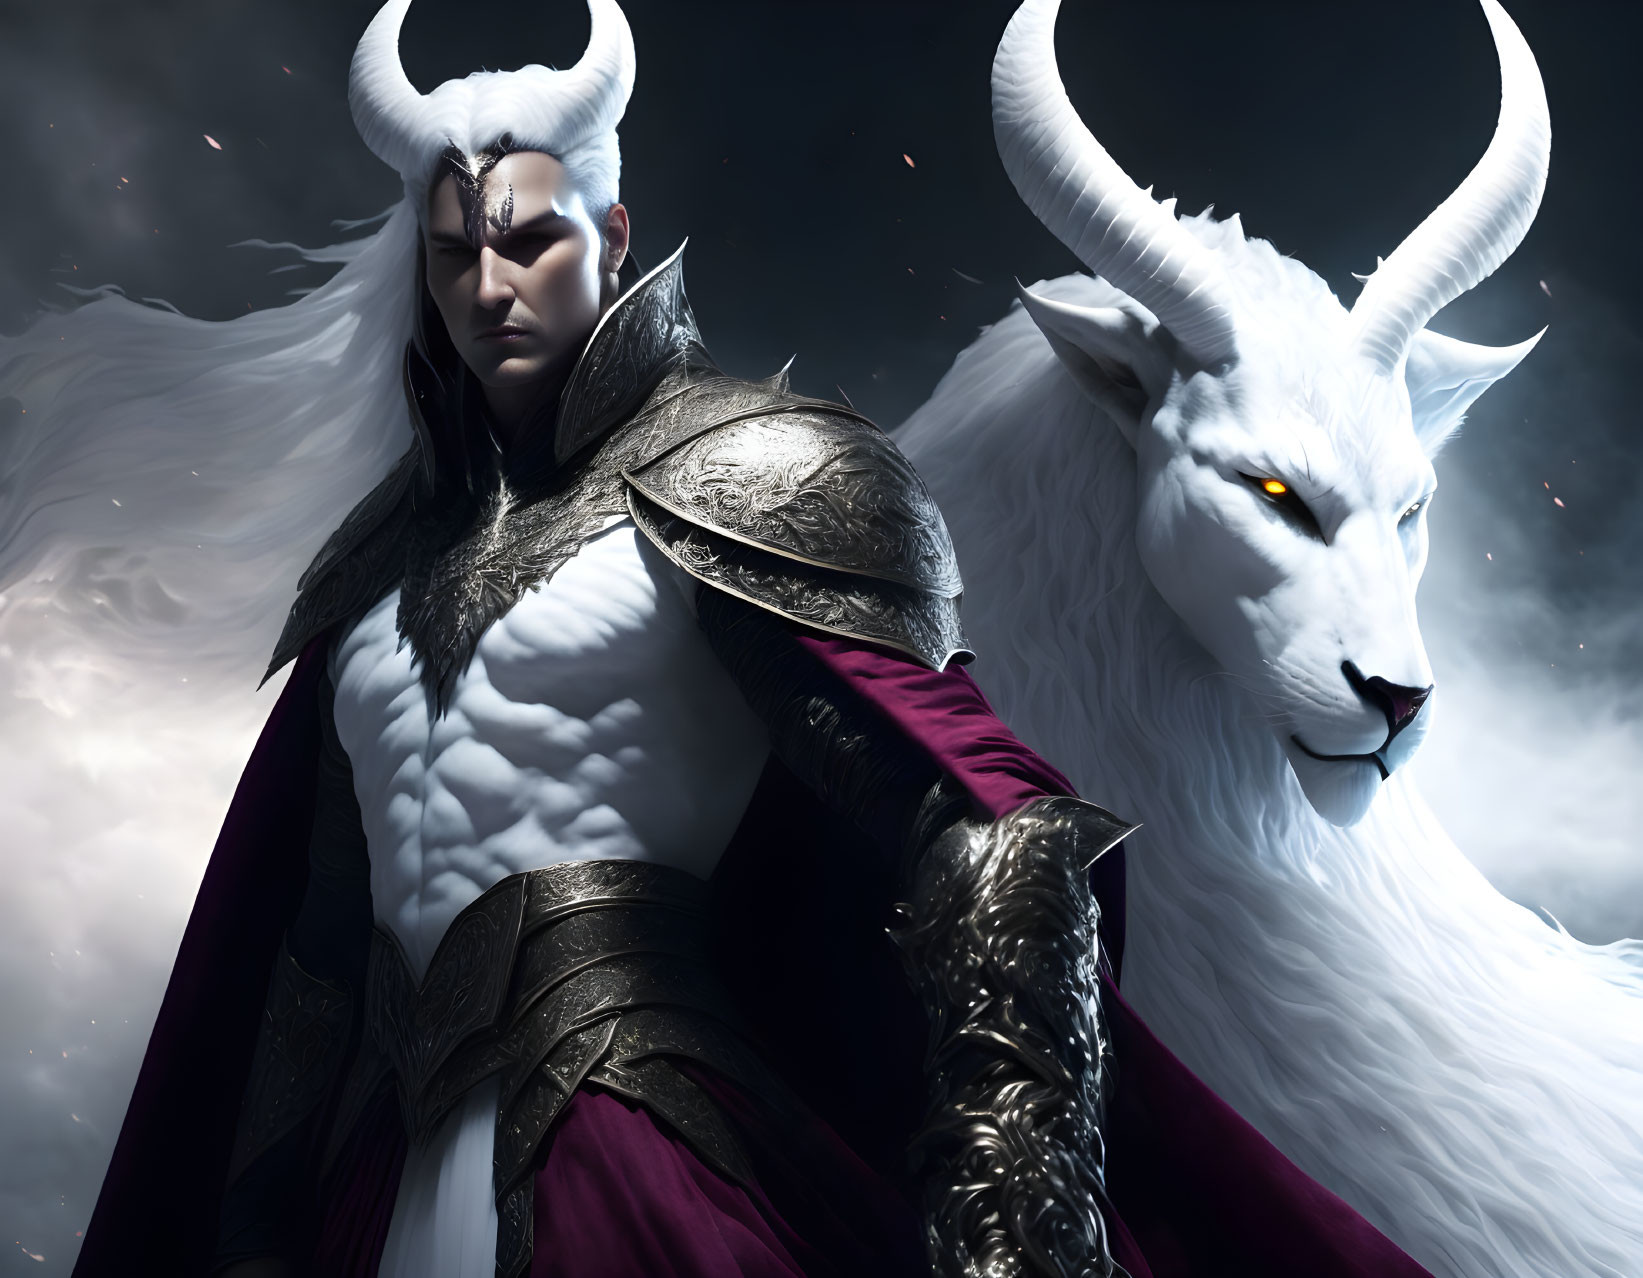 Fantasy illustration of armored figure with white horns and giant white horned goat under cloudy night sky